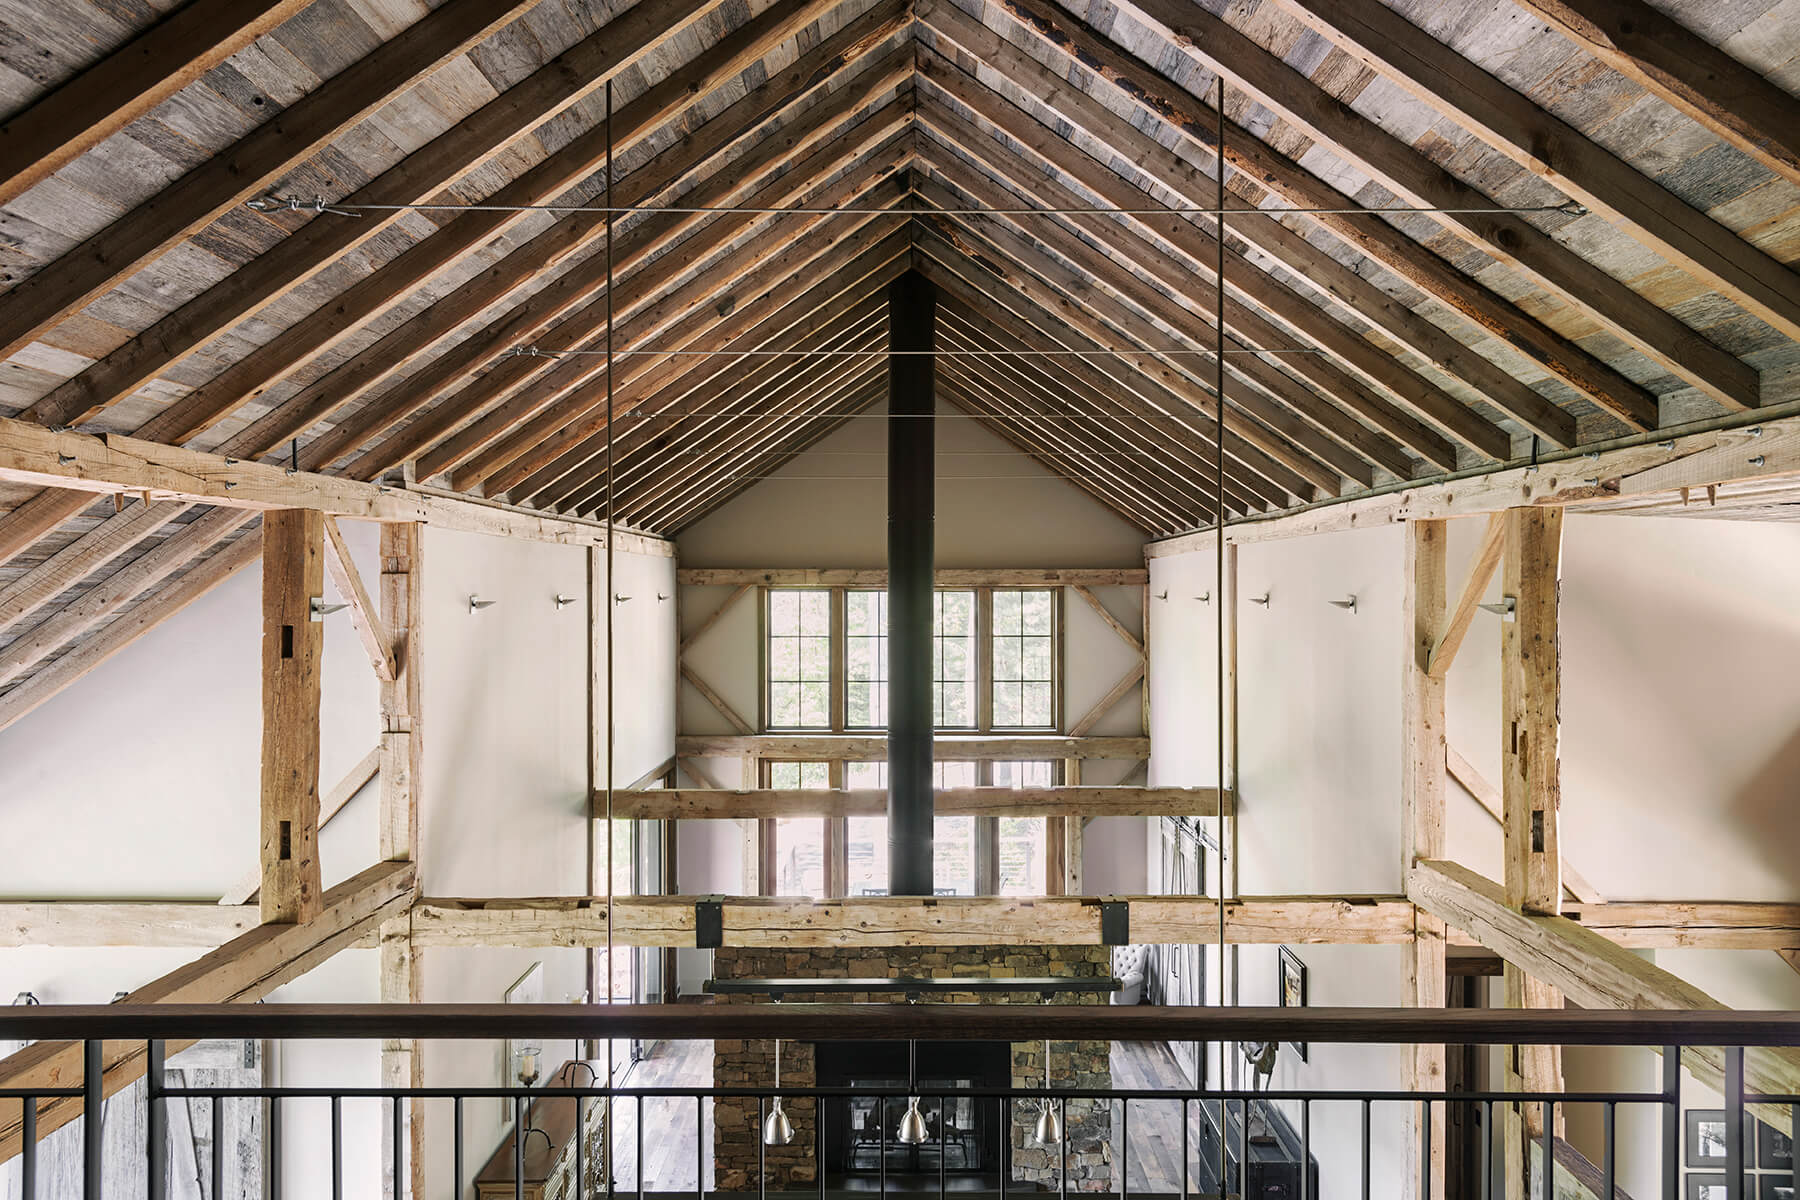 The Beaucatcher timber barn architectural build